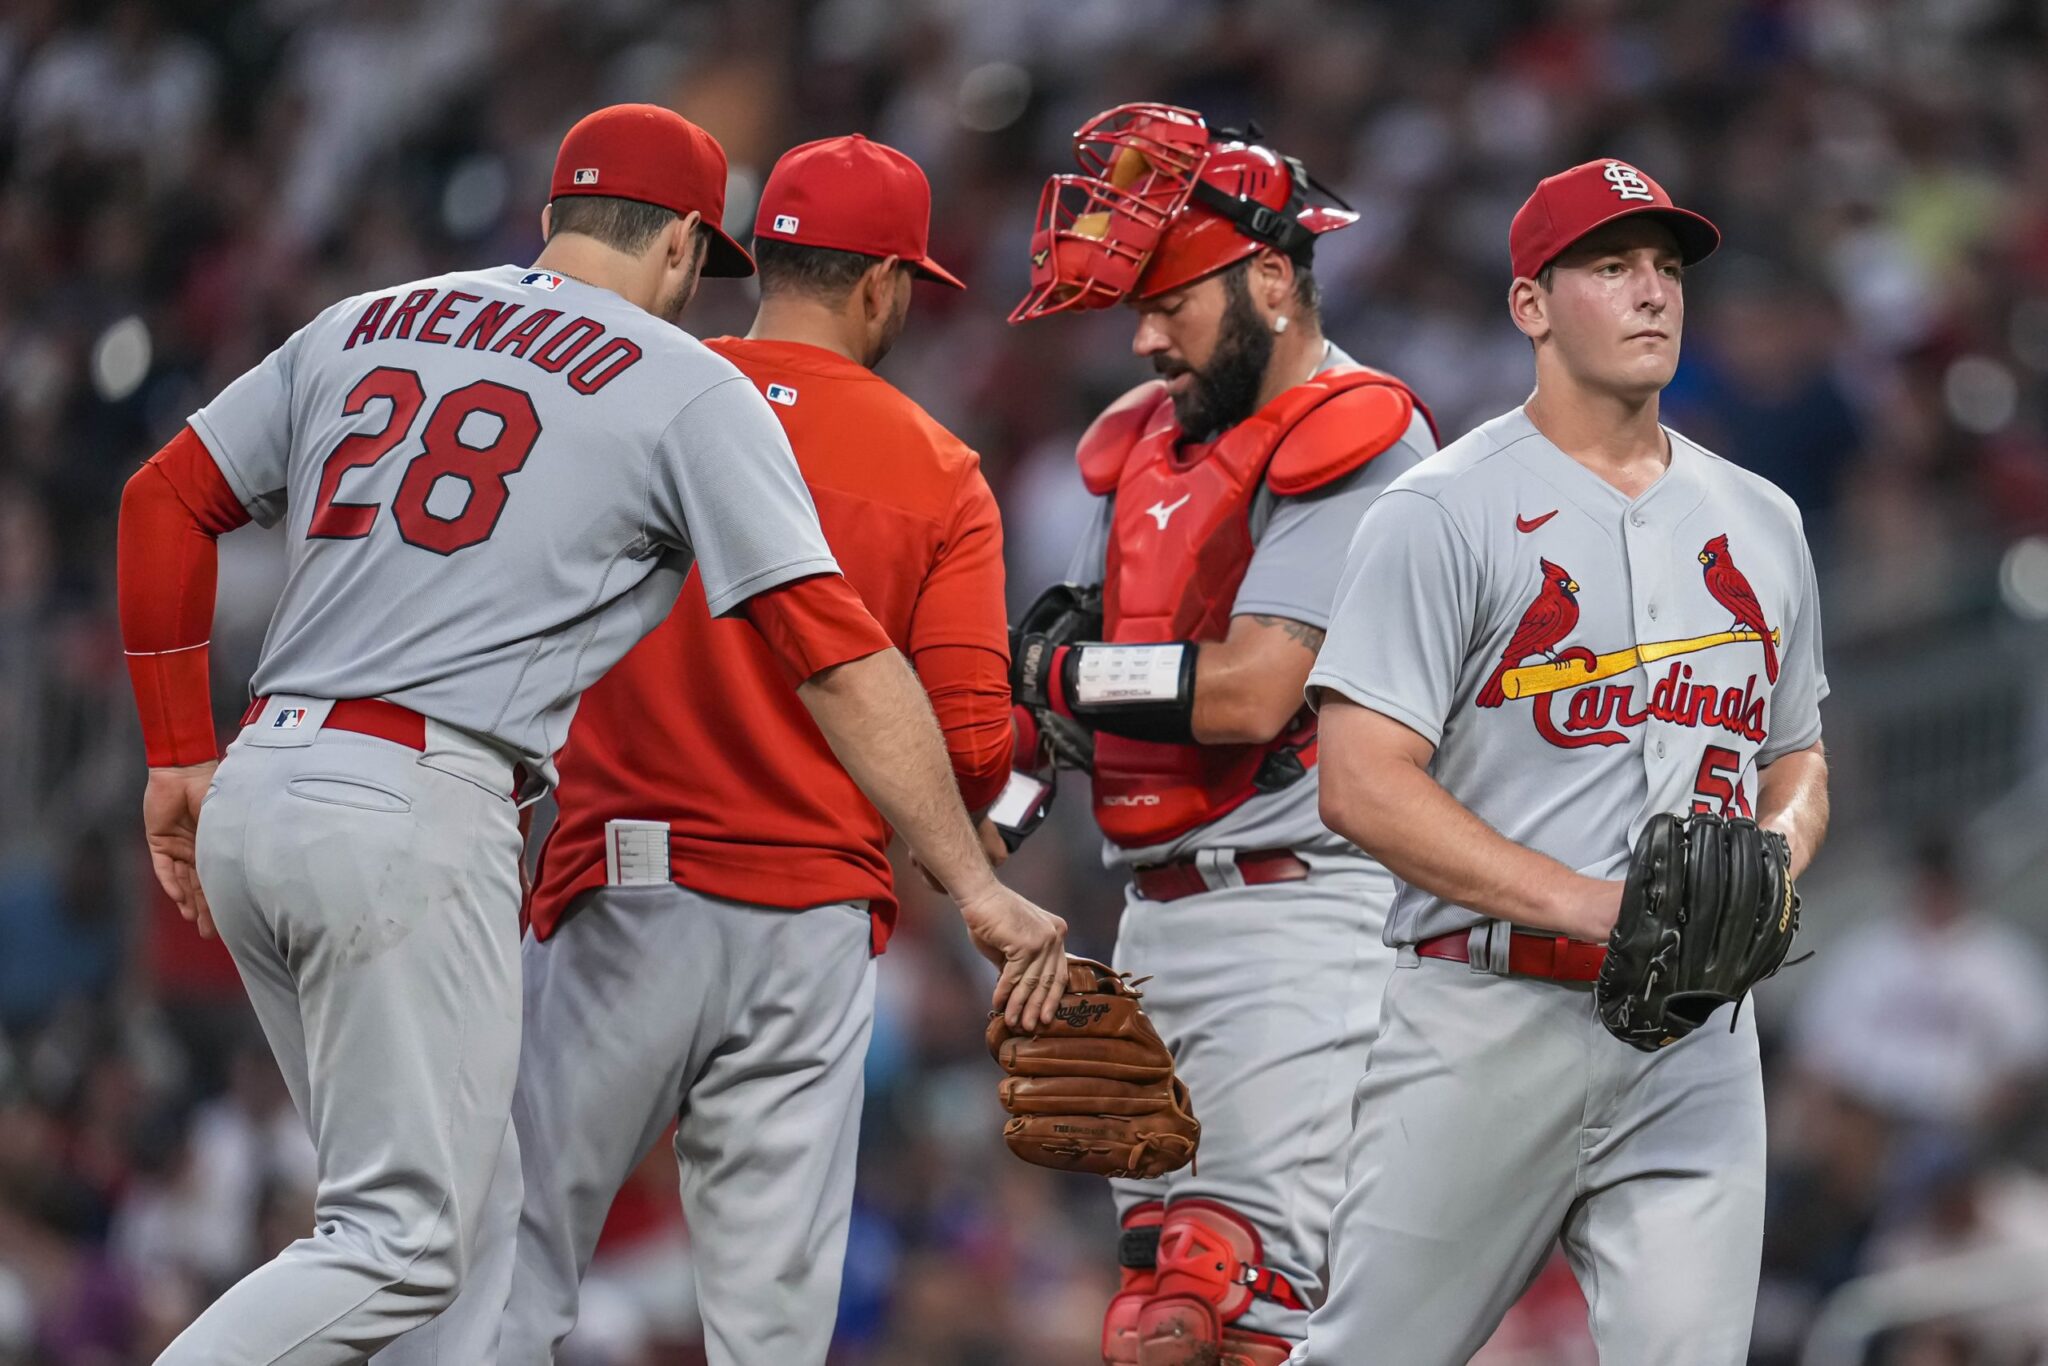 Cardinals place righty Jordan Hicks on IL with forearm strain